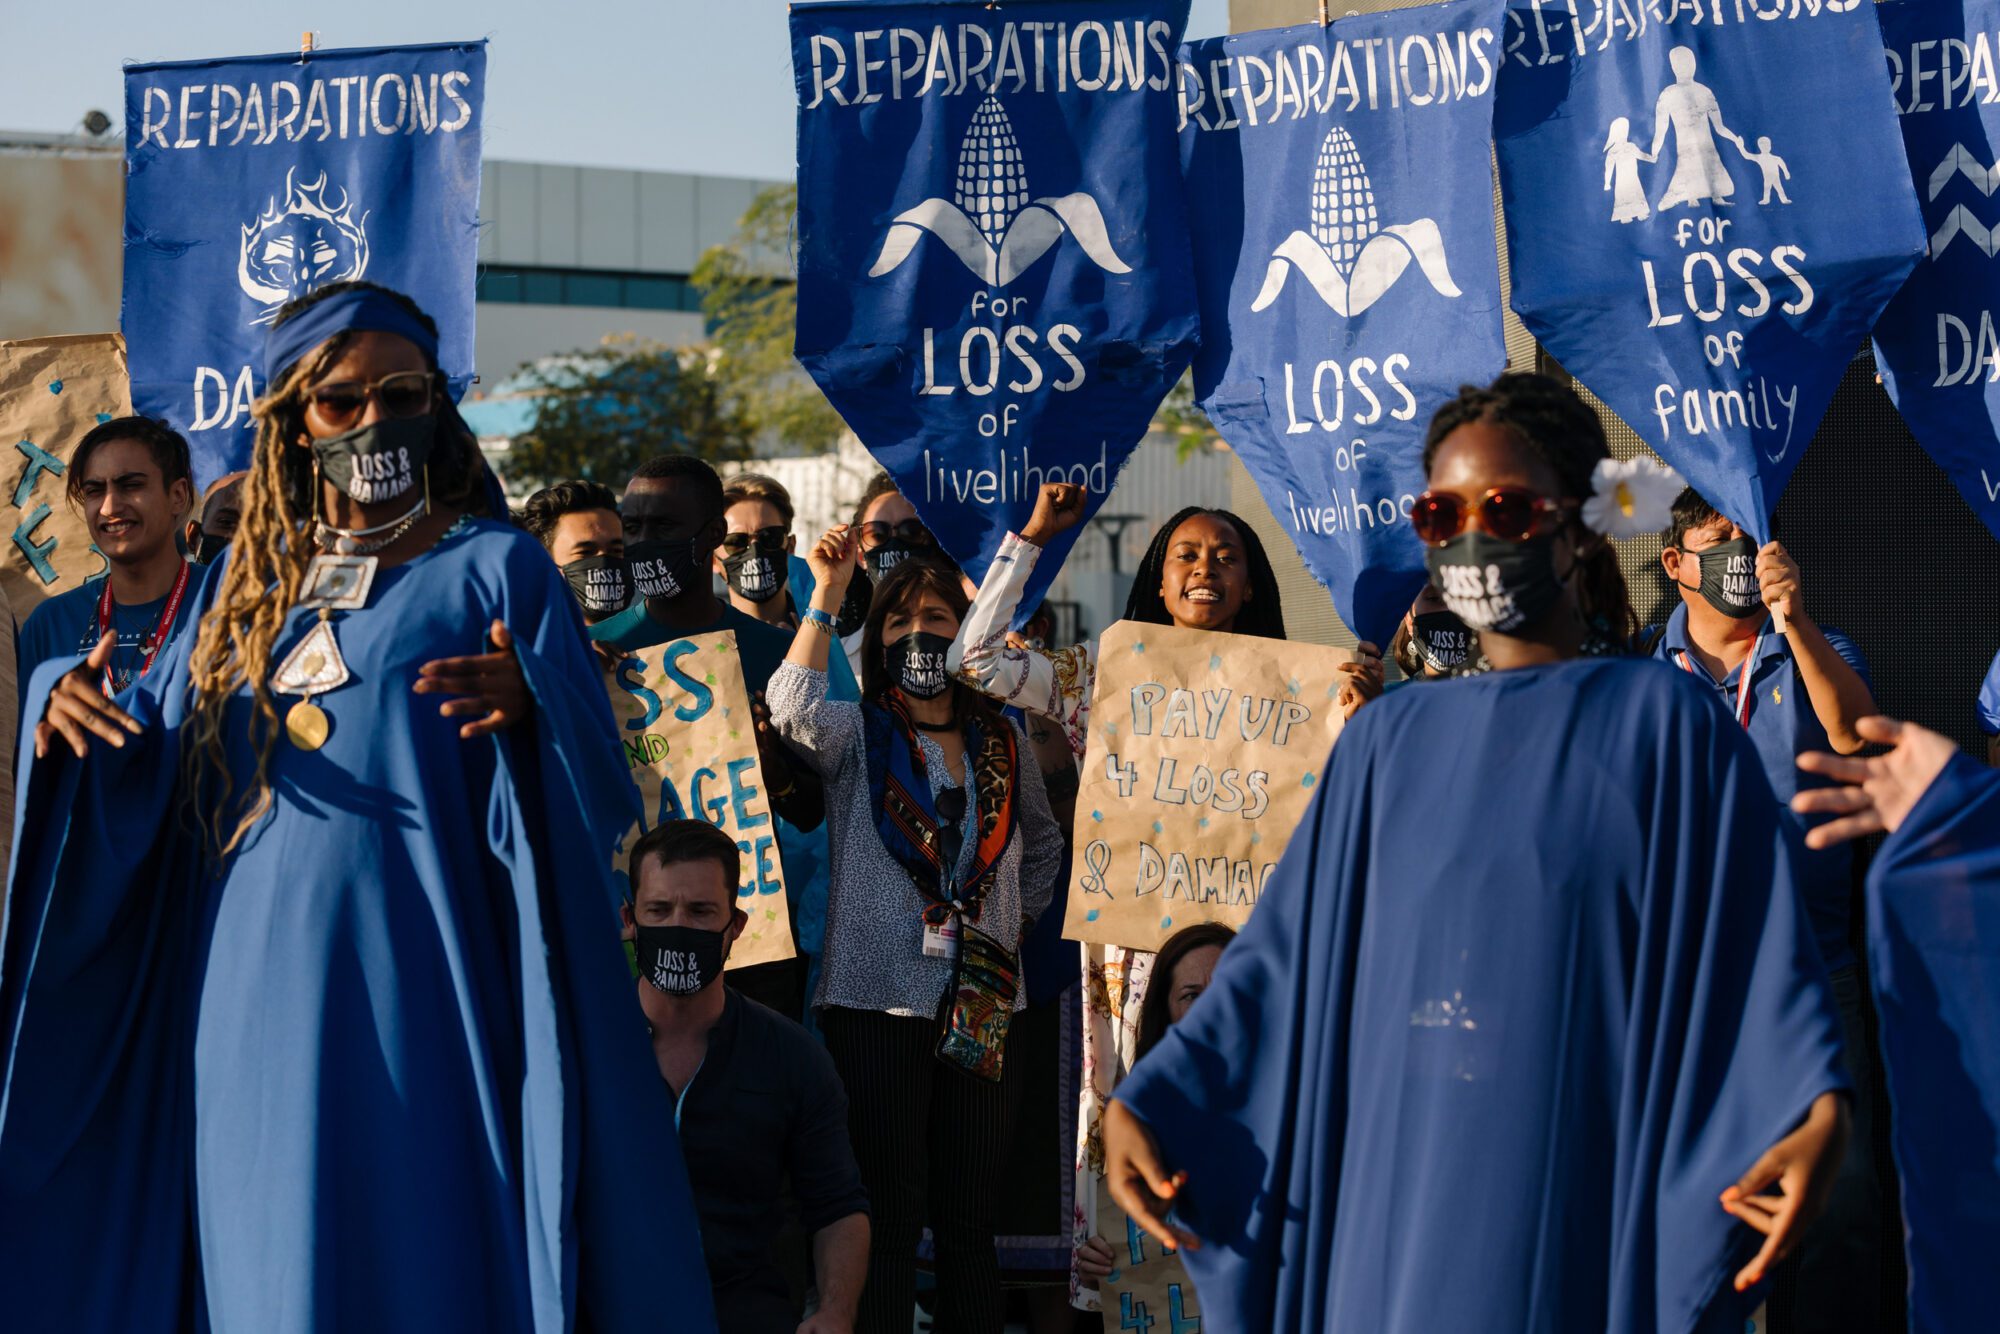 A group of protestors. At the front, woman stand wearing blue gowns and "Loss and damage" emblazoned on face masks. Behind, they hold banners saying "Pay up 4 loss and damage" and "Reparations for loss of livelihood".